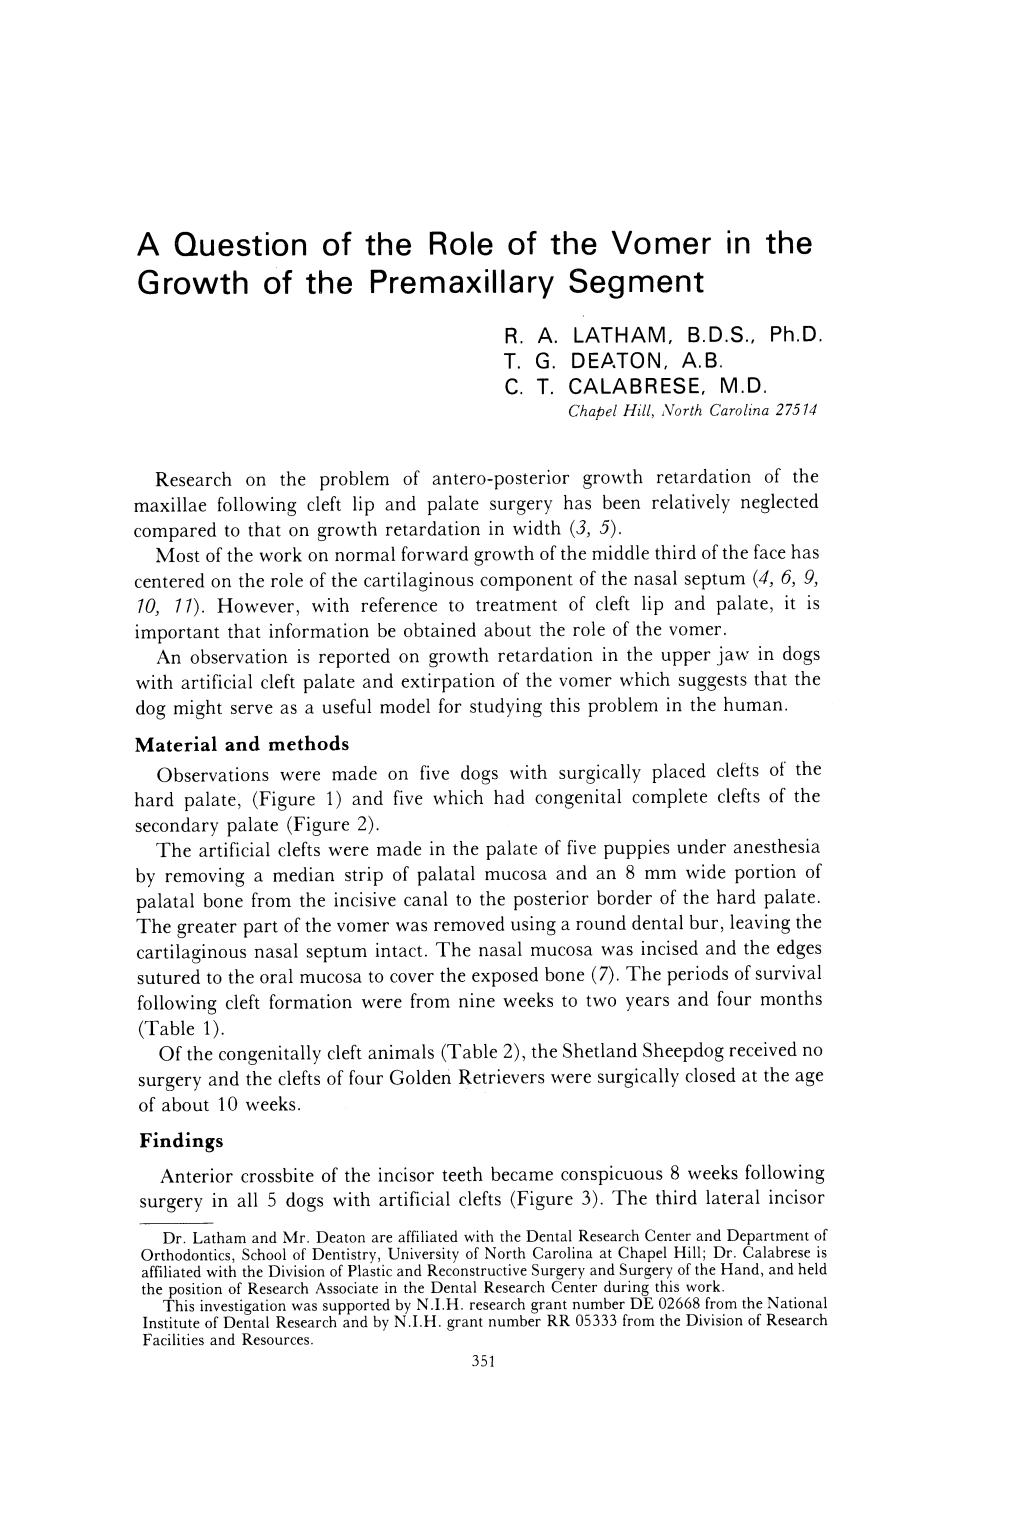 A Question of the Role of the Vomer in the Growth of the Premaxillary Segment R